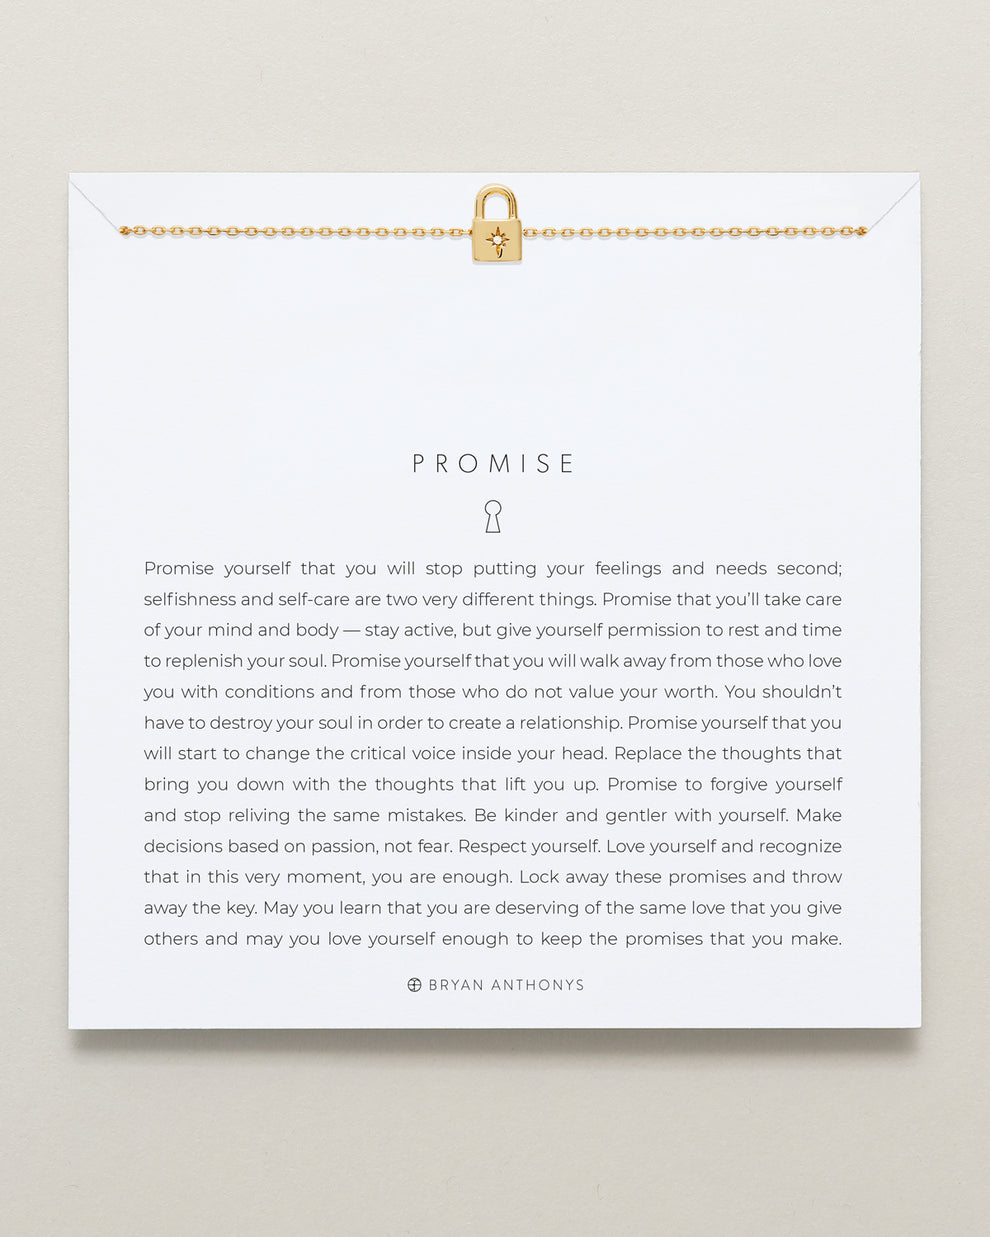 Bryan Anthonys "Promise" Necklace-Gold